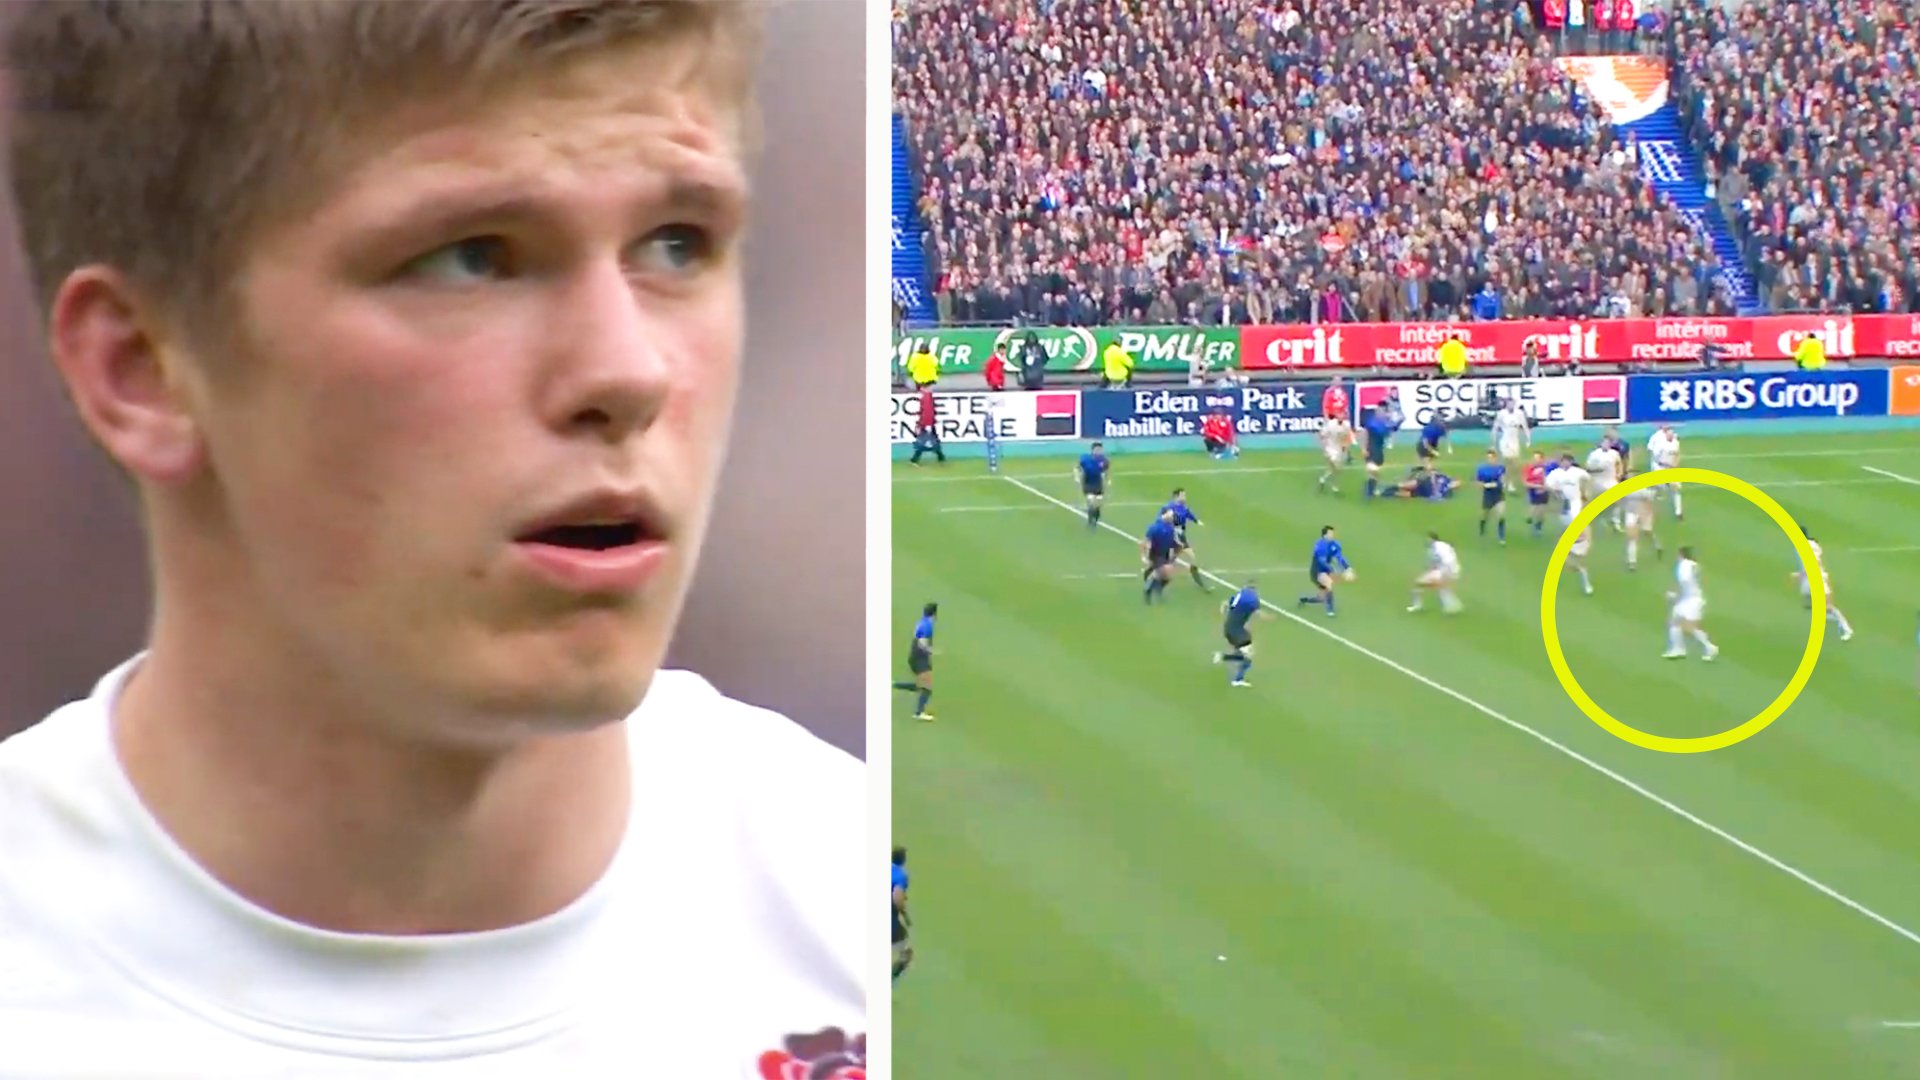 New video shows moment that Owen Farrell truly arrived on international stage with match winning intervention